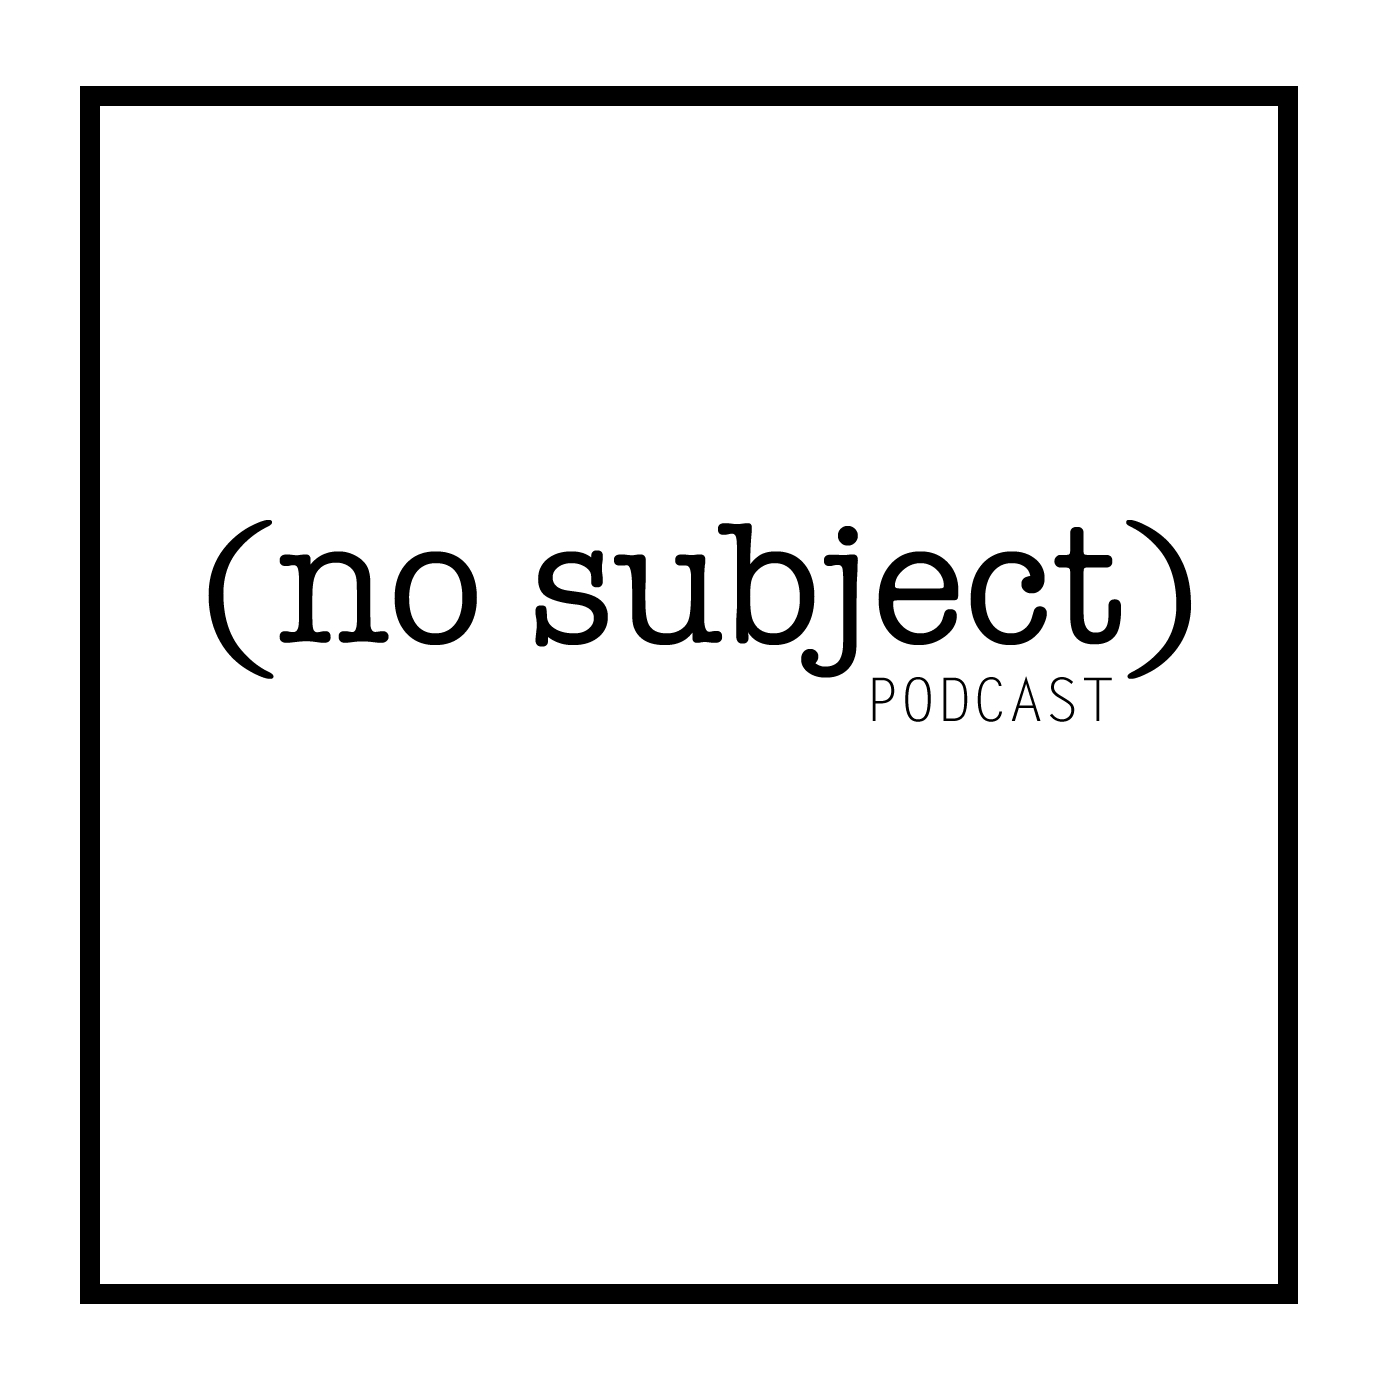 The No Subject Podcast